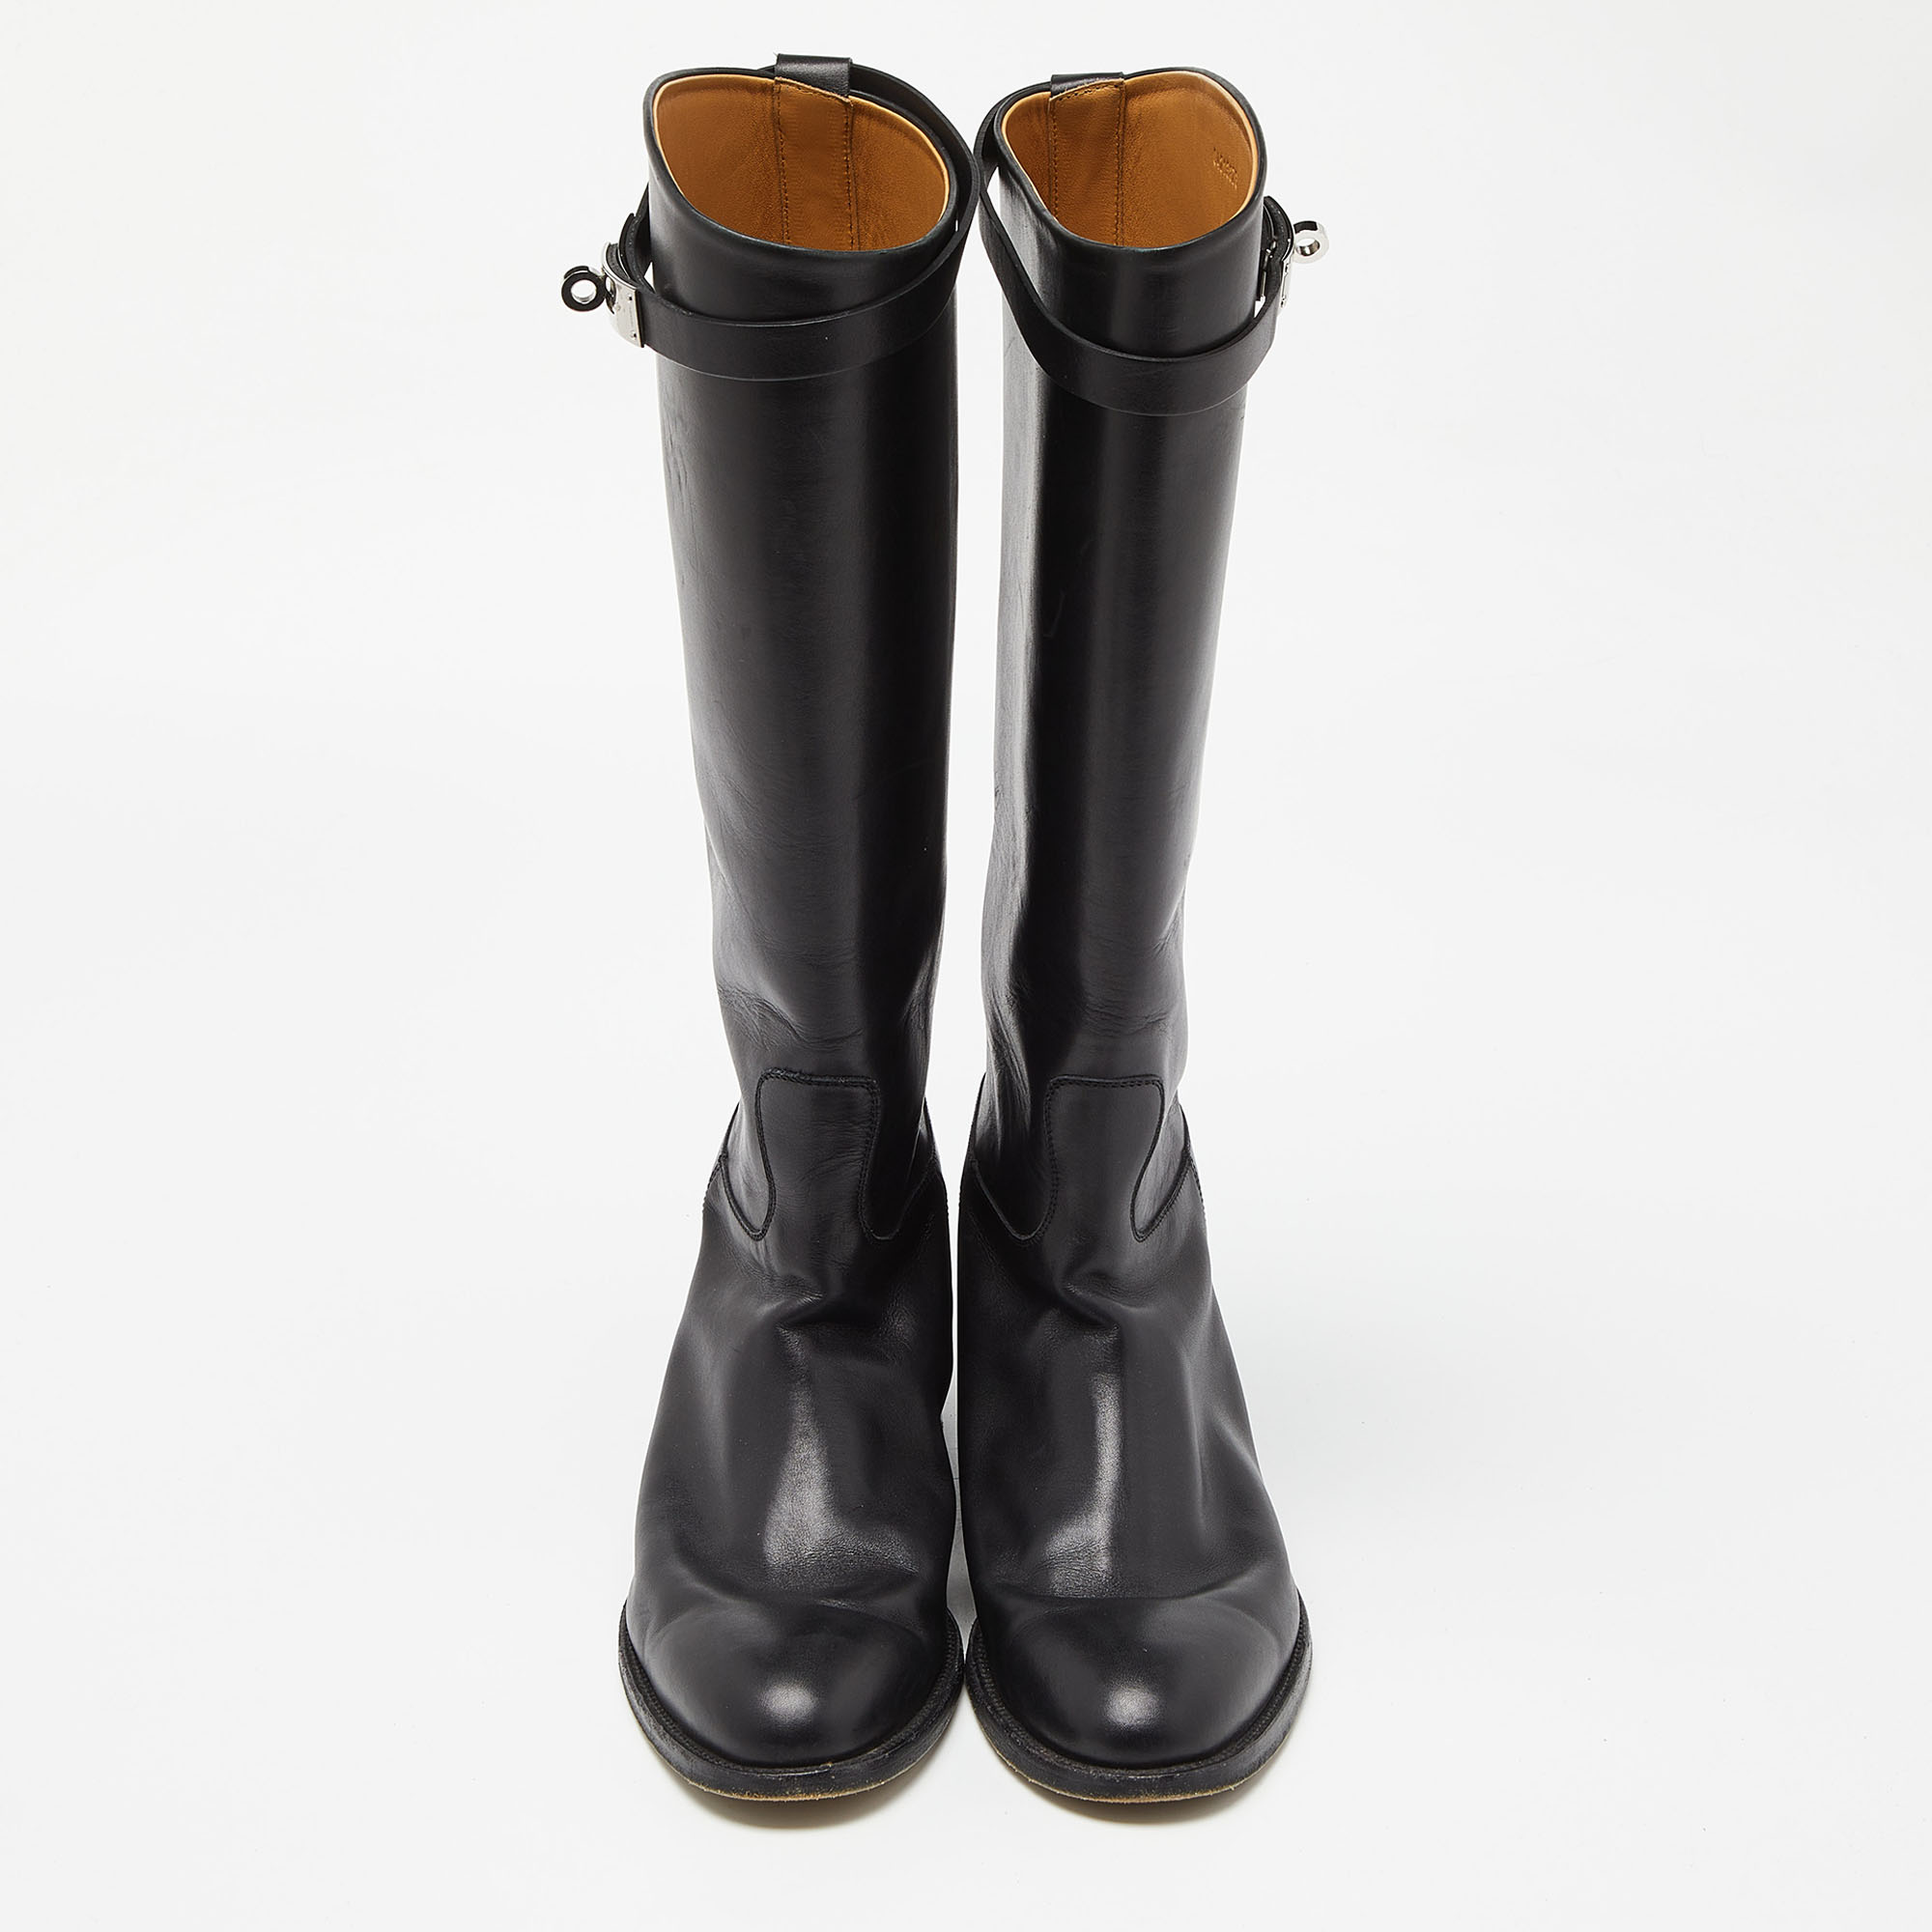 Hermes Black Leather Jumping Boots Size 40